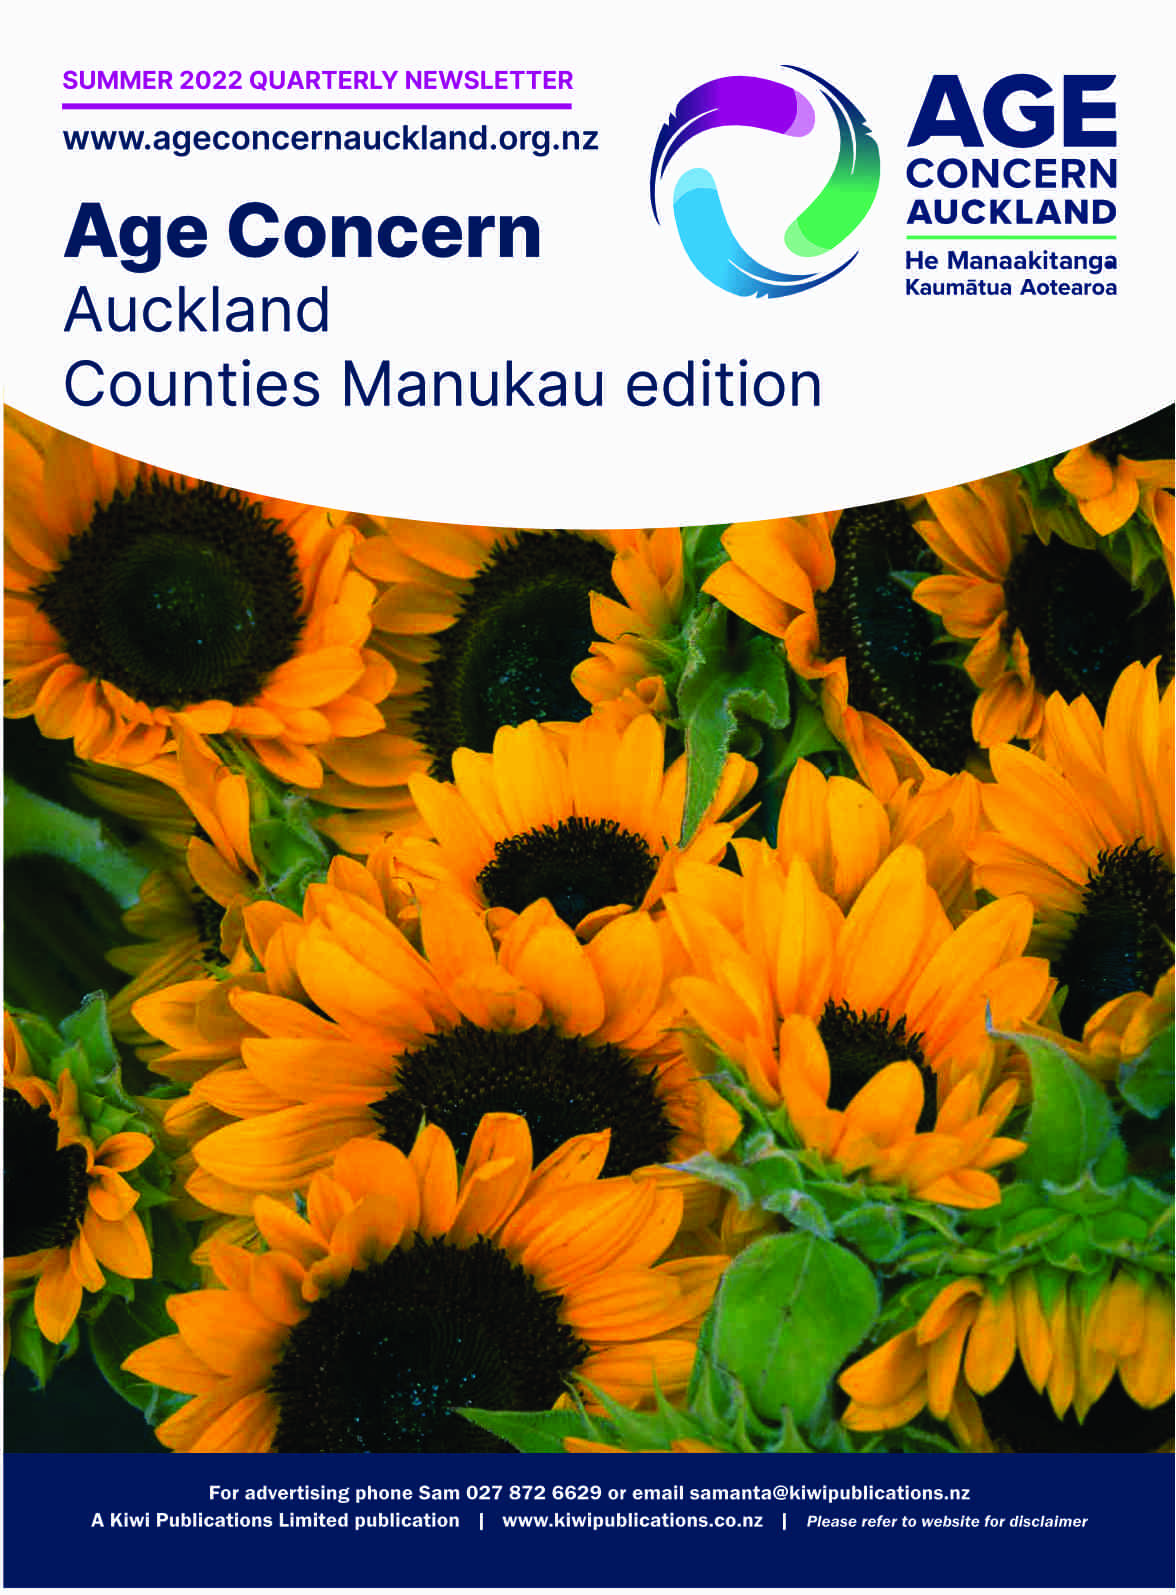 Issue 4 2022 Summer - Age Concern Auckland Counties Manukau